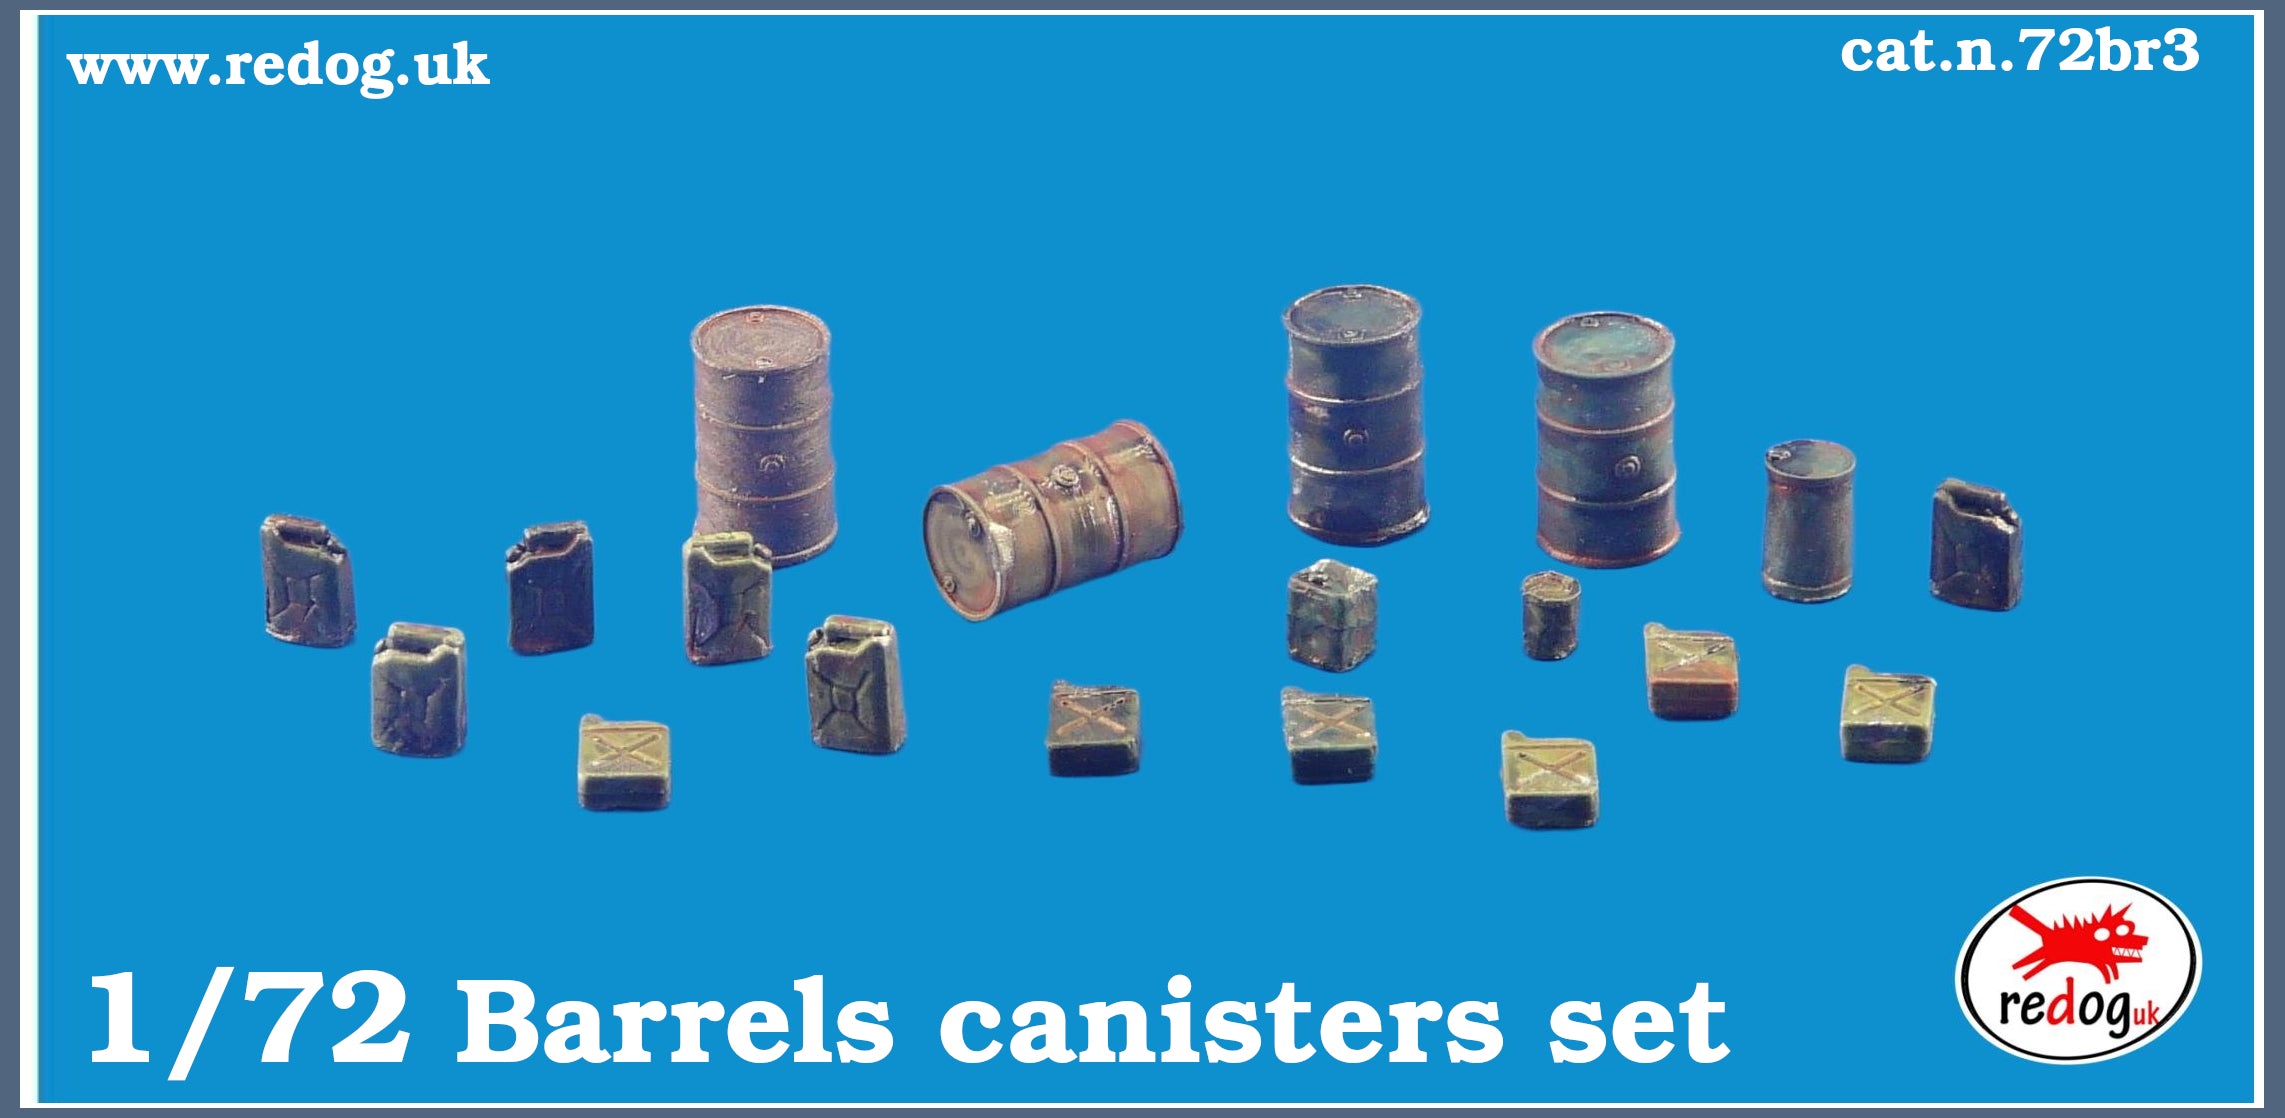 1:72 &1:76 Barrels and Jerry Cans kit for Scale models kits or Dioramas cat - 72br3